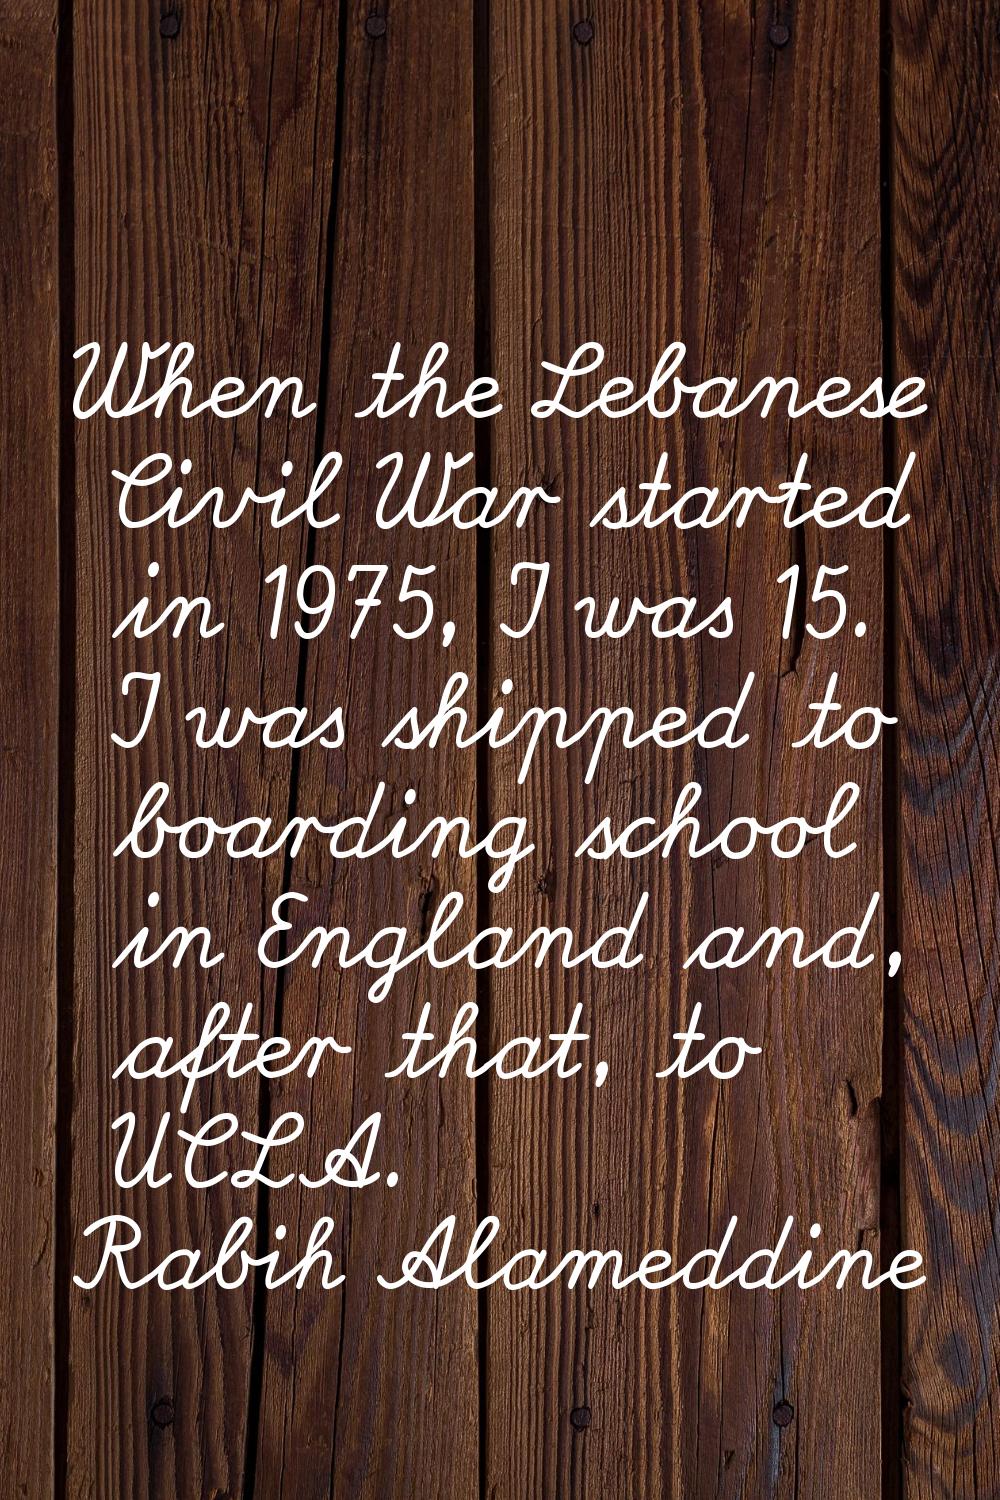 When the Lebanese Civil War started in 1975, I was 15. I was shipped to boarding school in England 